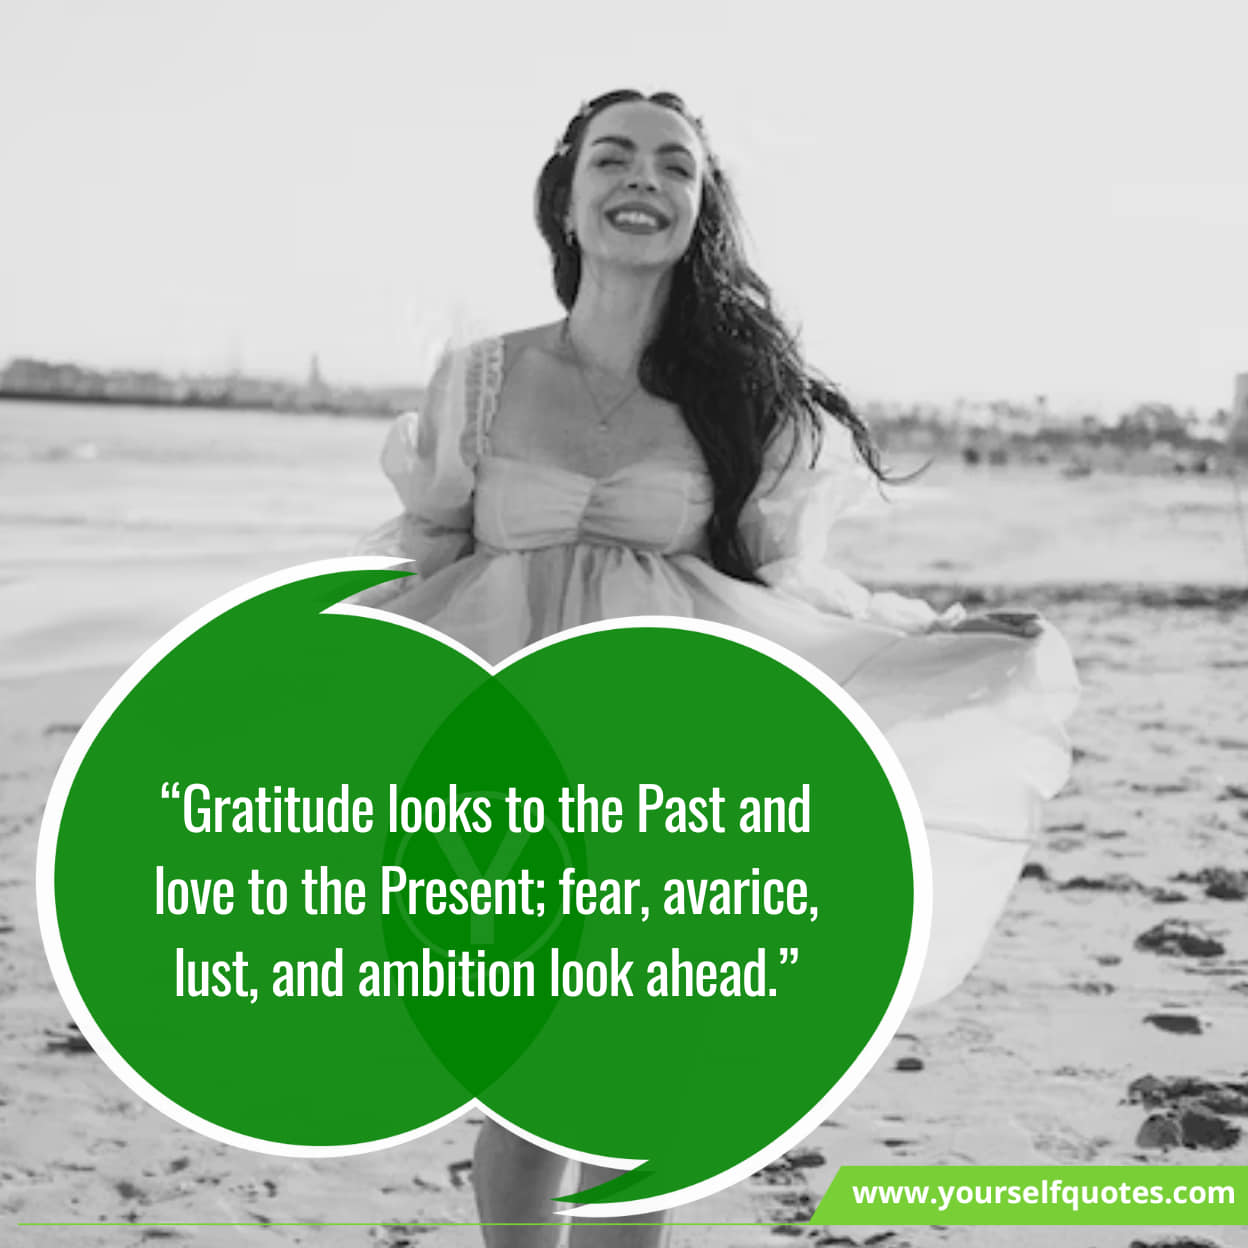 Gratitude and grace in quotes